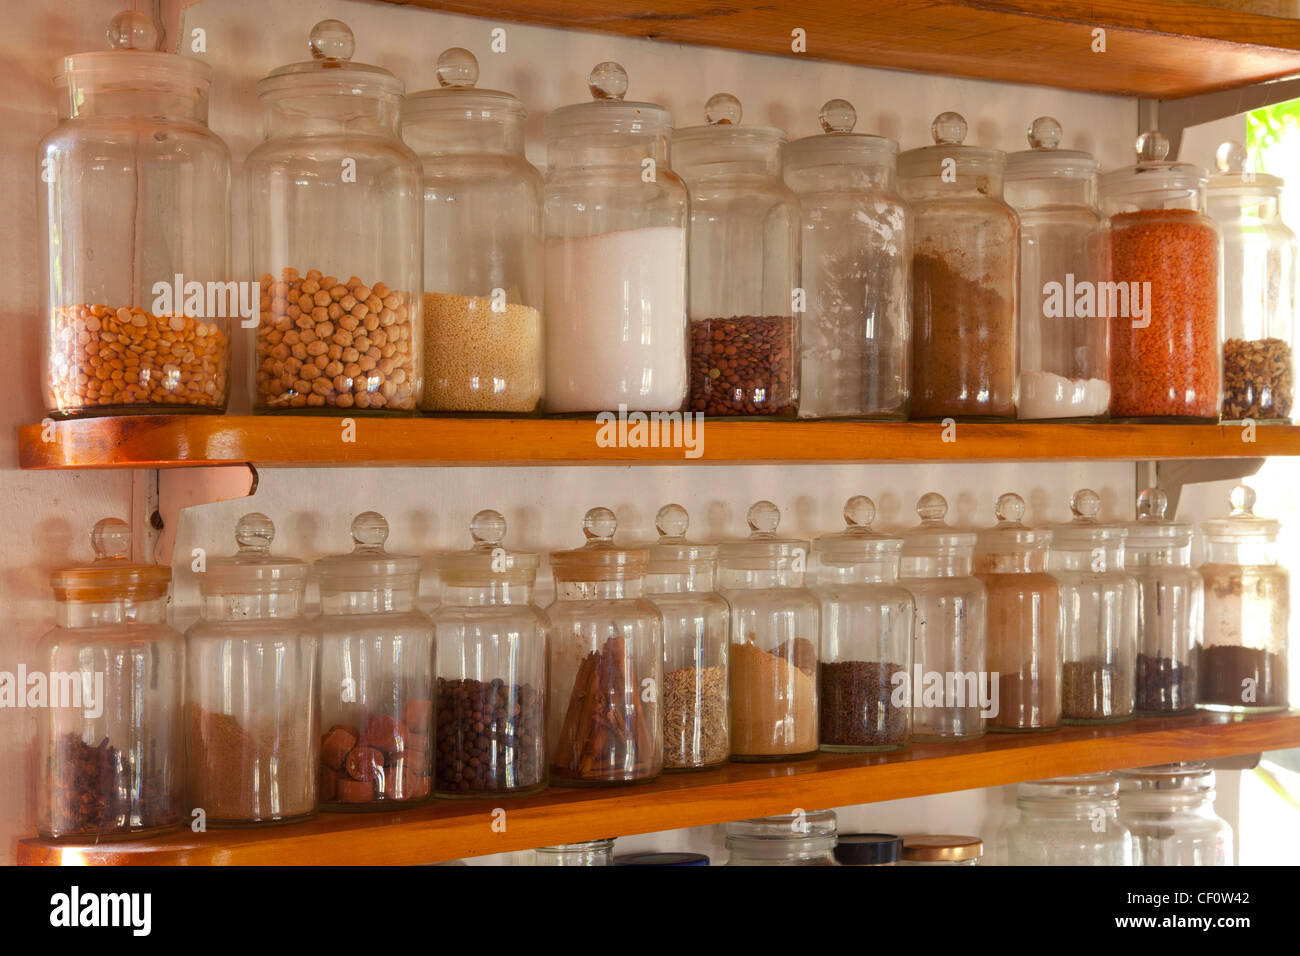 Shelves in house kitchen full of glass storage jars full of cooking ingredients Stock Photo